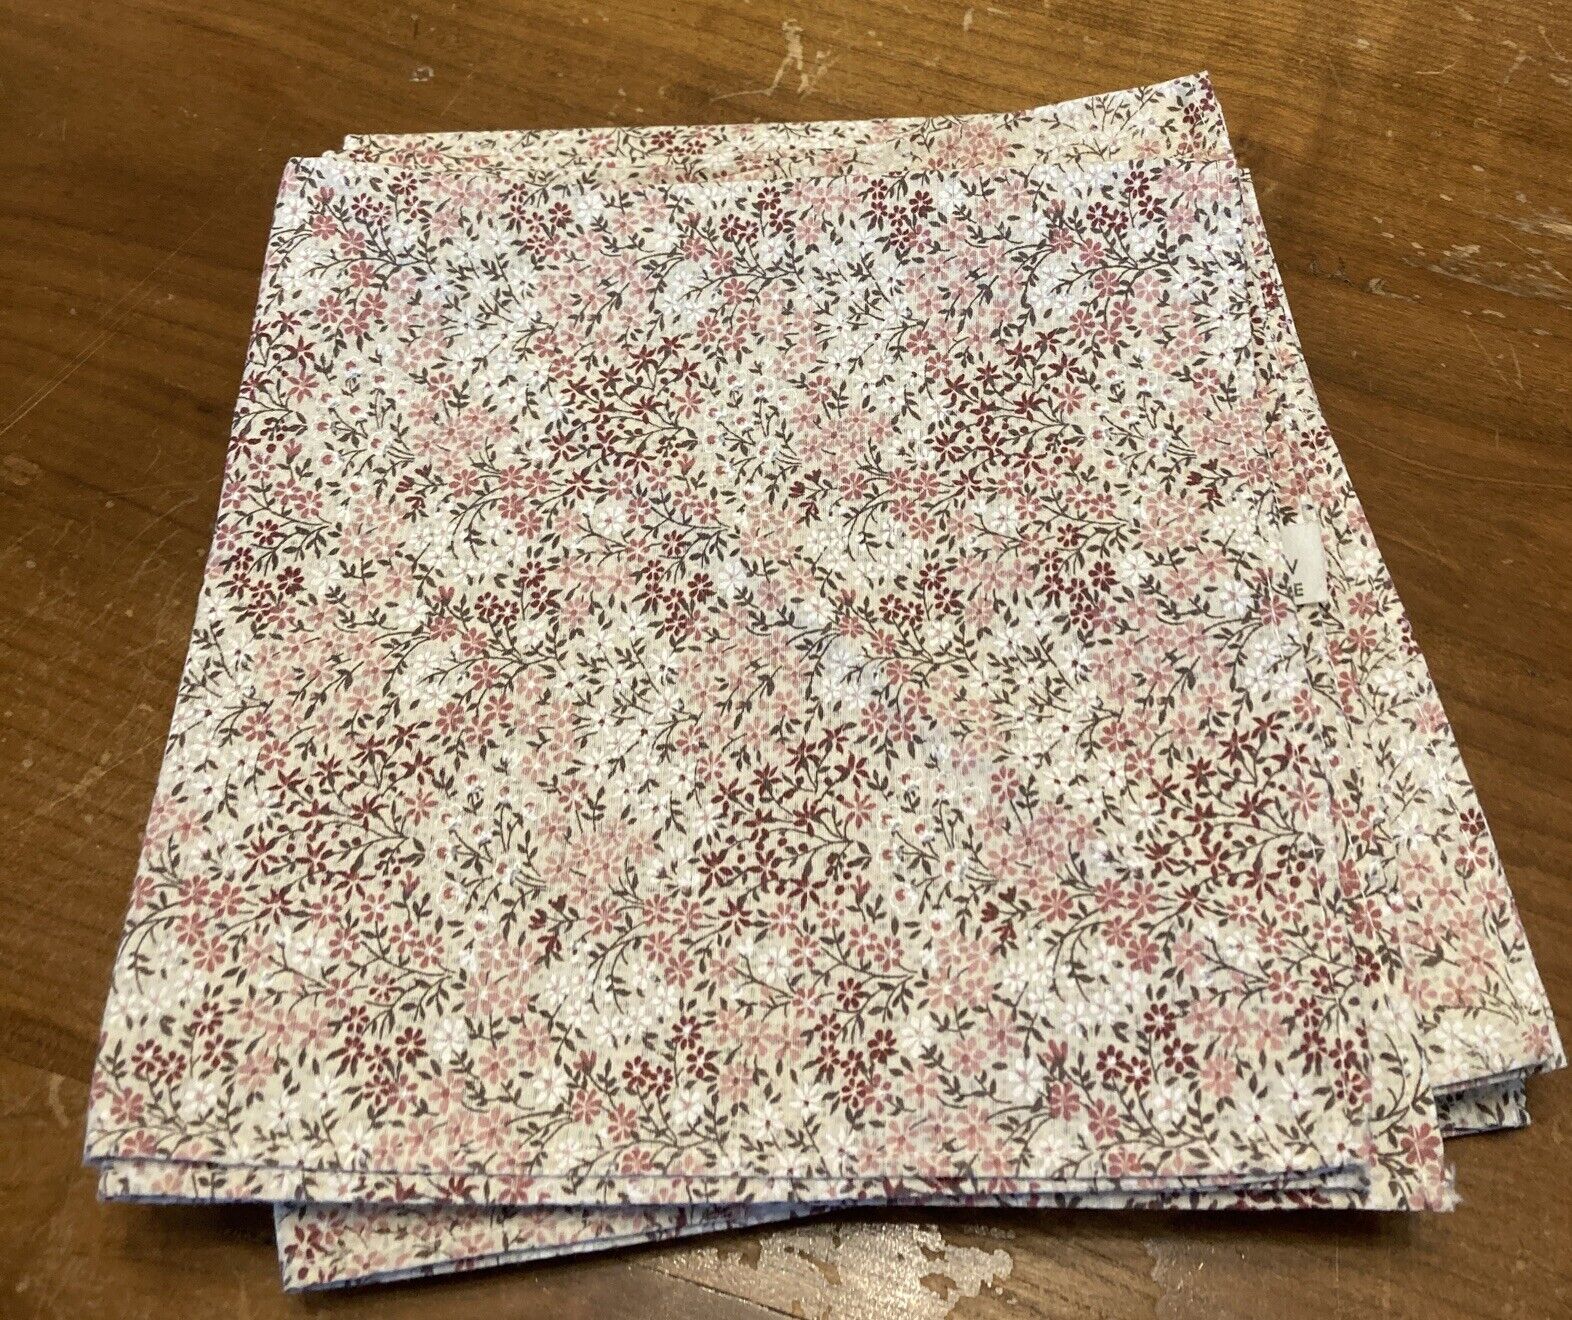 7 French Country Floral Cotton Napkins Mauve Pink Green Floral 15”x 15”